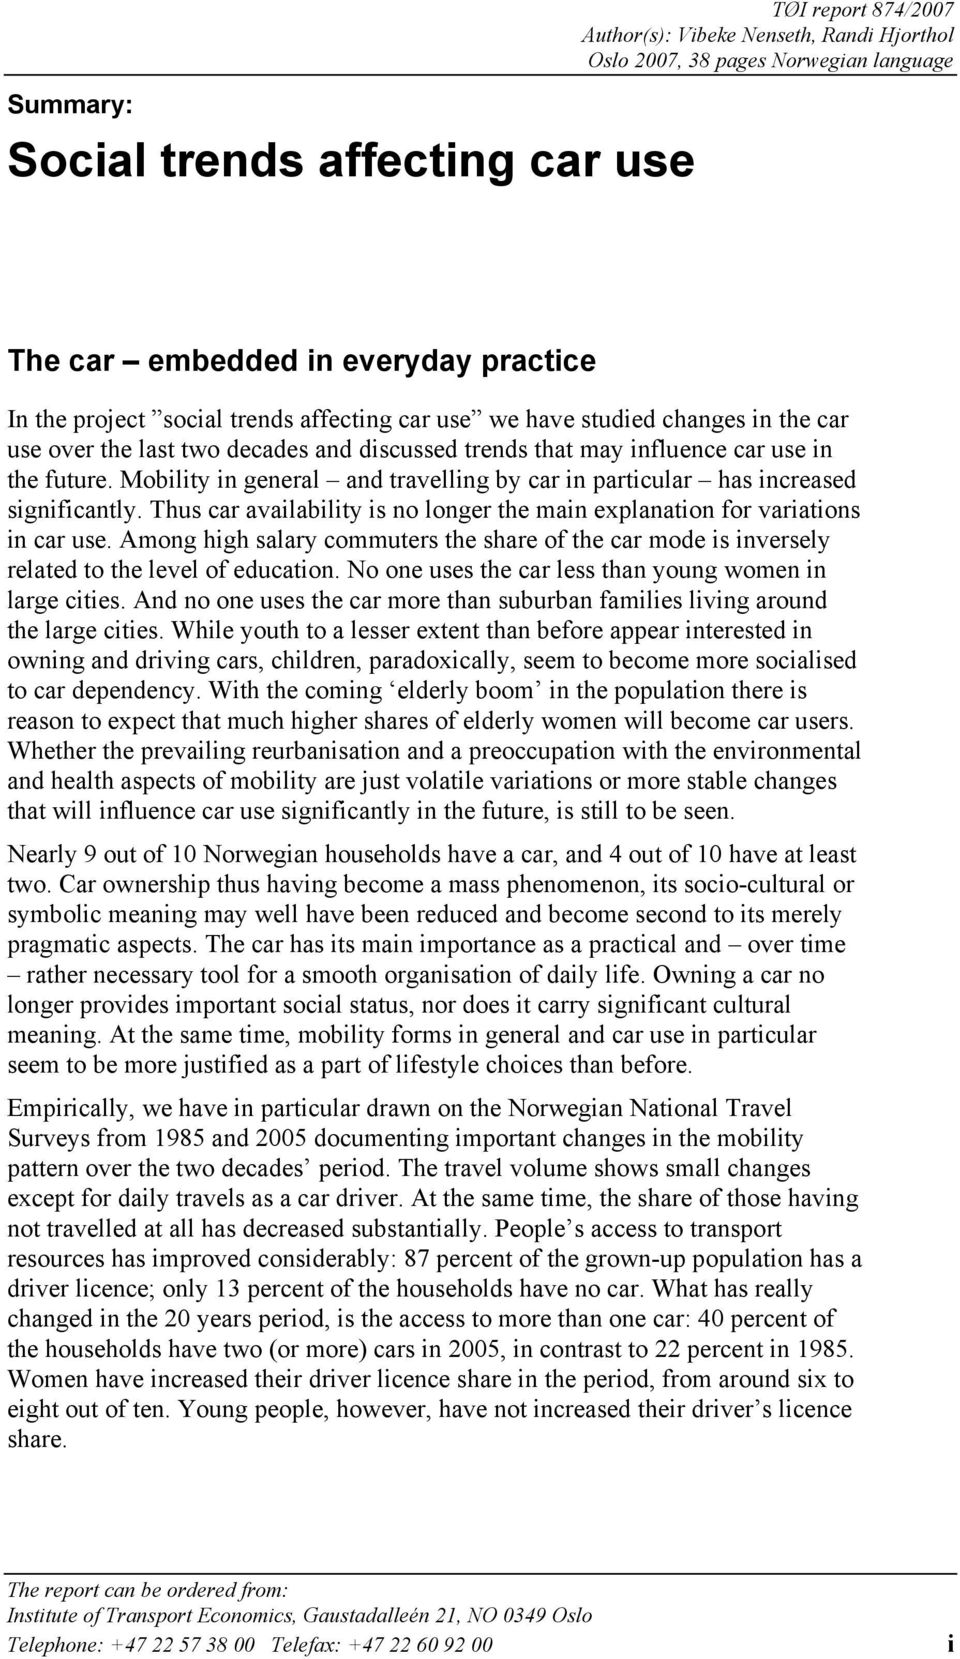 Mobility in general and travelling by car in particular has increased significantly. Thus car availability is no longer the main explanation for variations in car use.